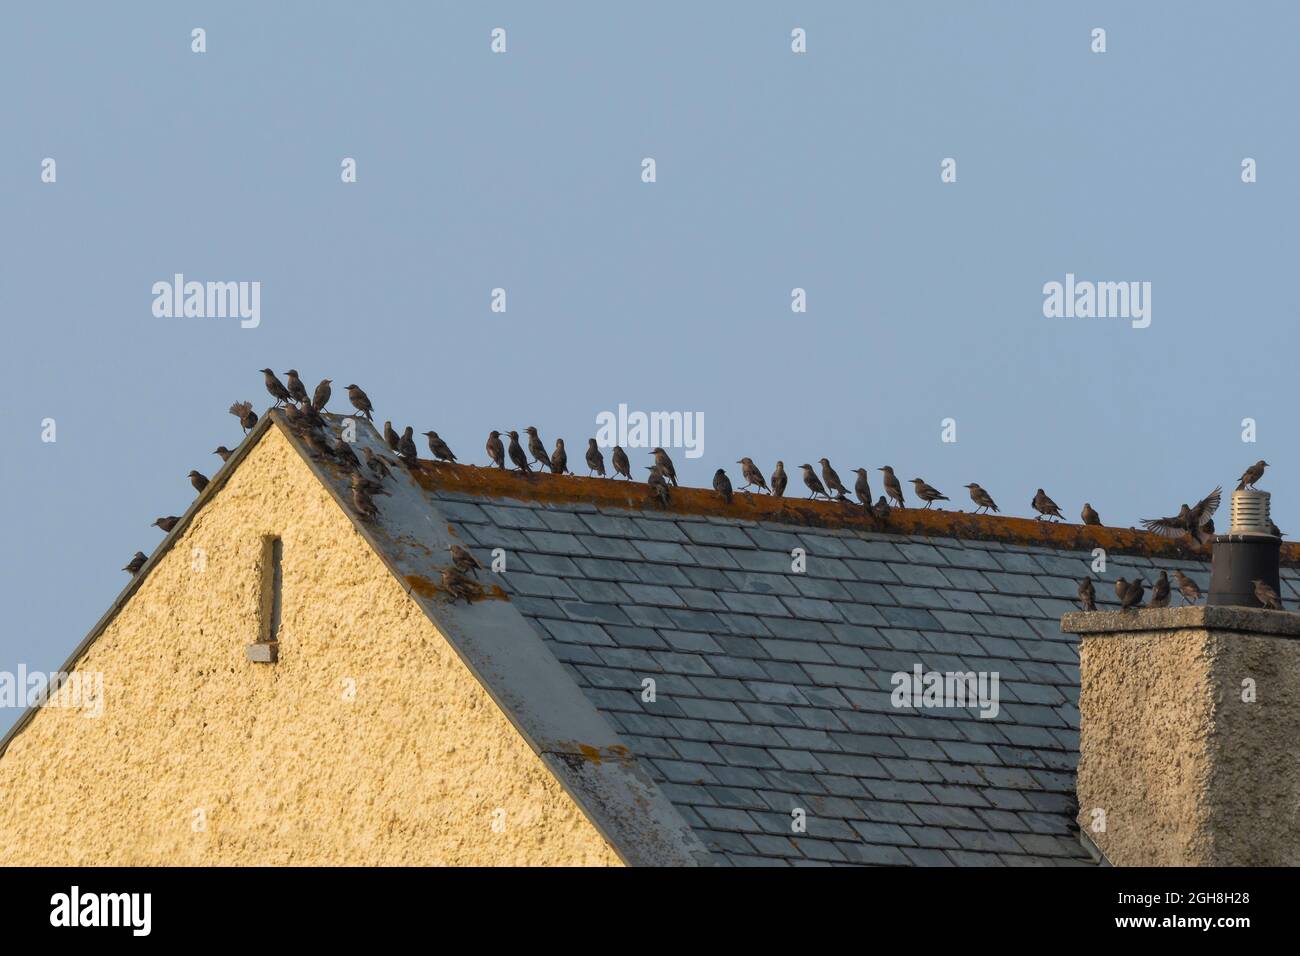 A small flock of Starlings Sturnidae perched on the roof of a house. Stock Photo